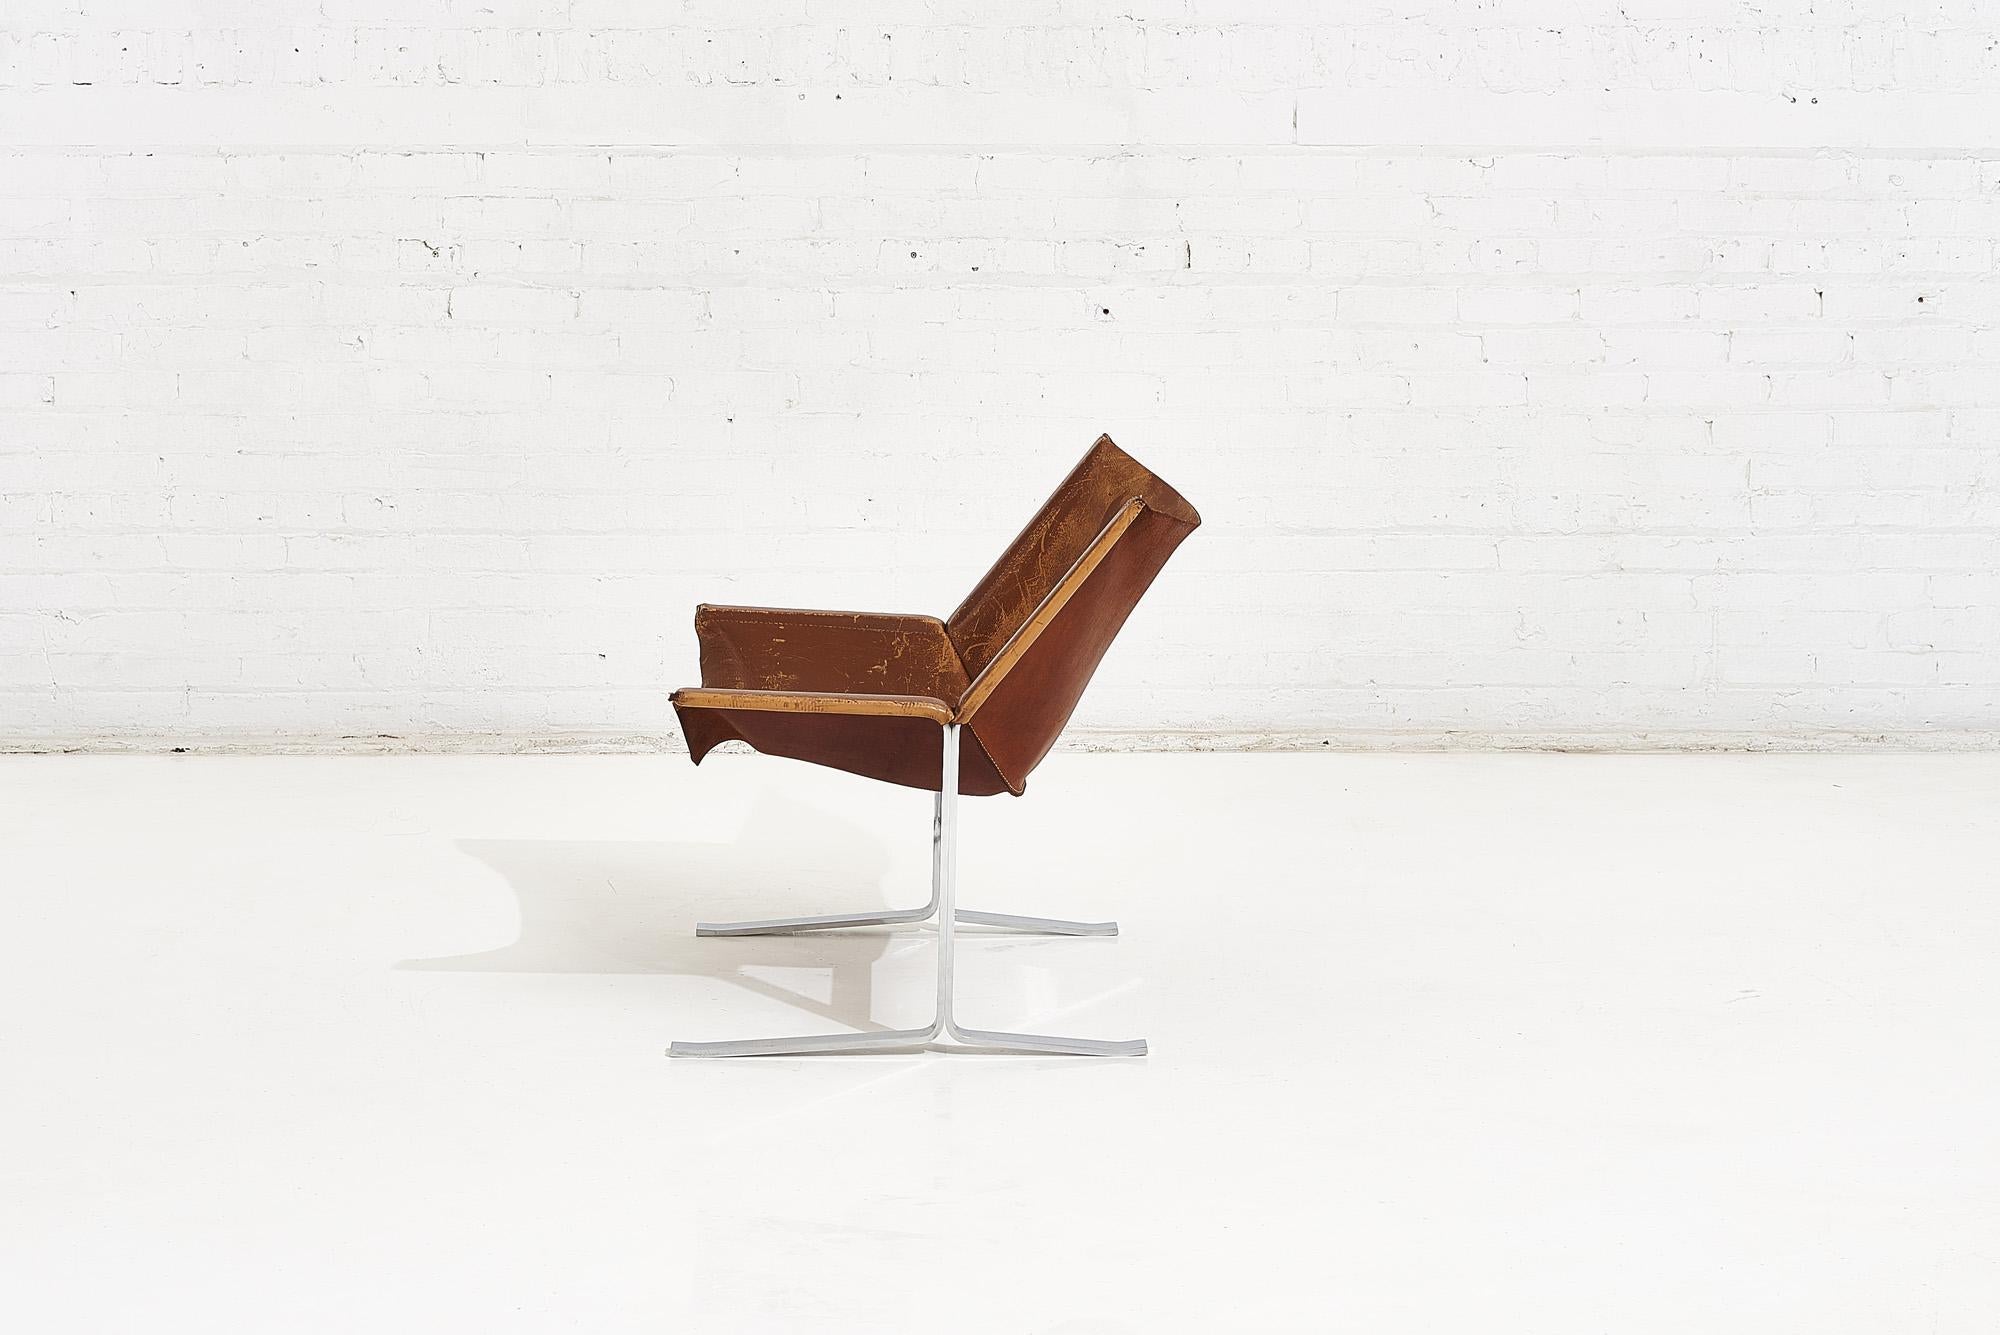 Sling chair model 248 by Clement Meadmore, circa 1970. All original with brown leather.